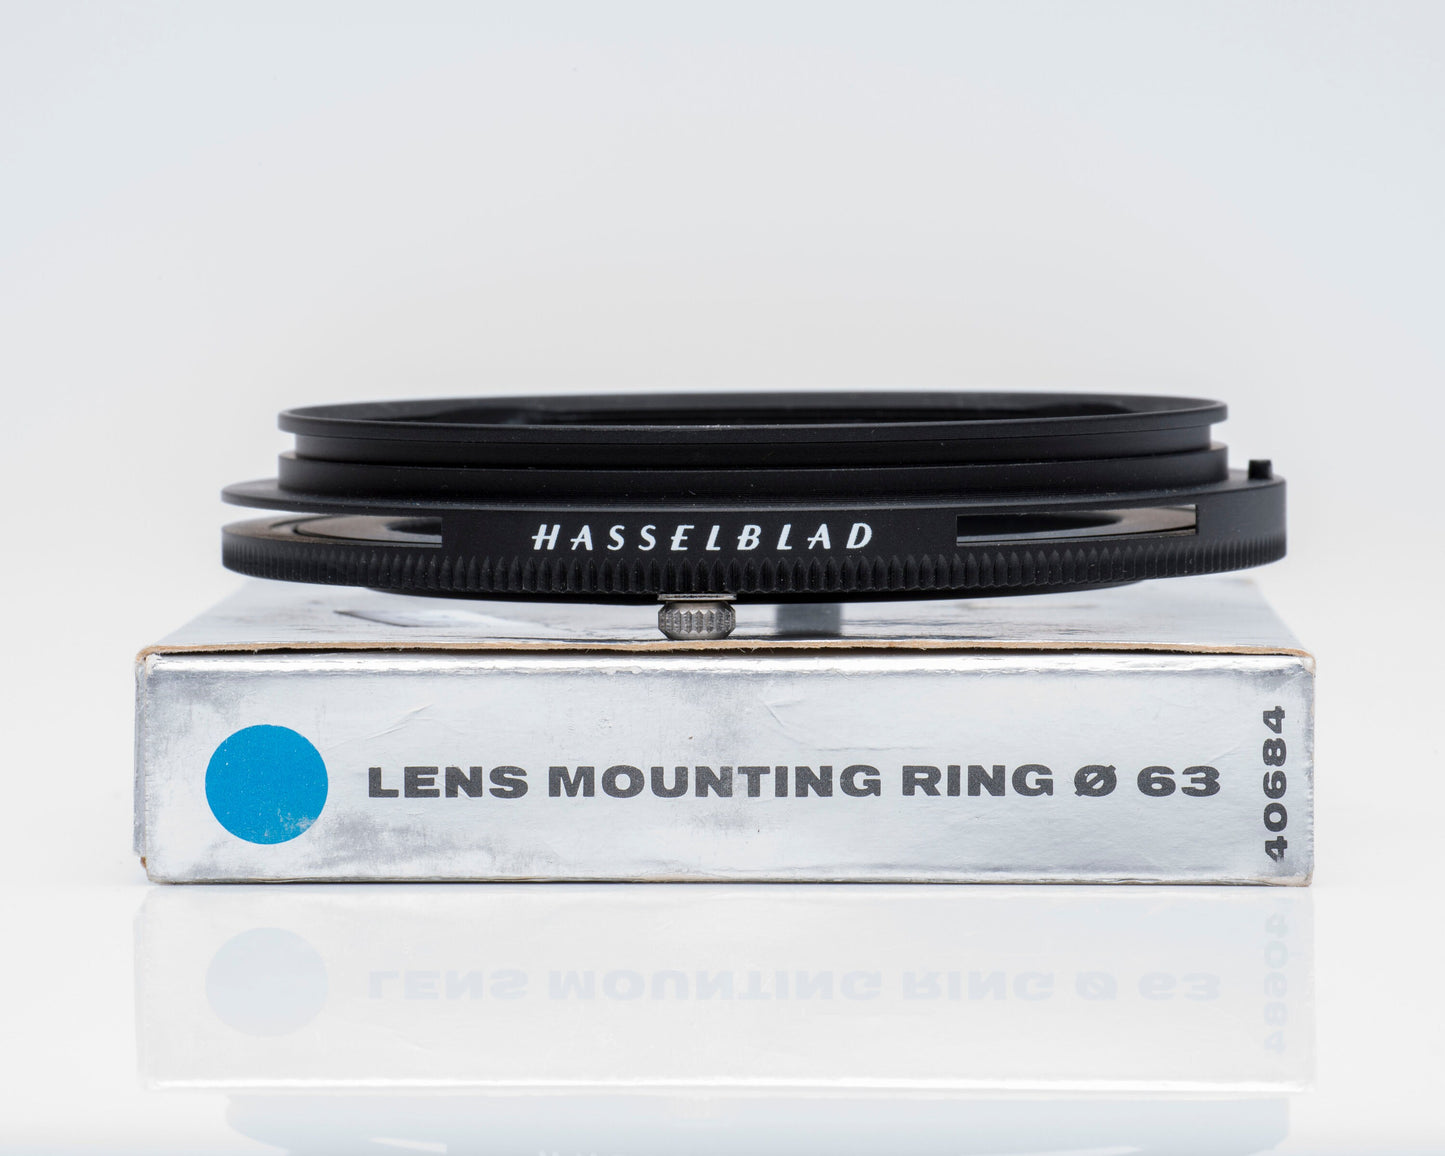 Hasselblad Bay 63 Lens Mounting Ring 40684